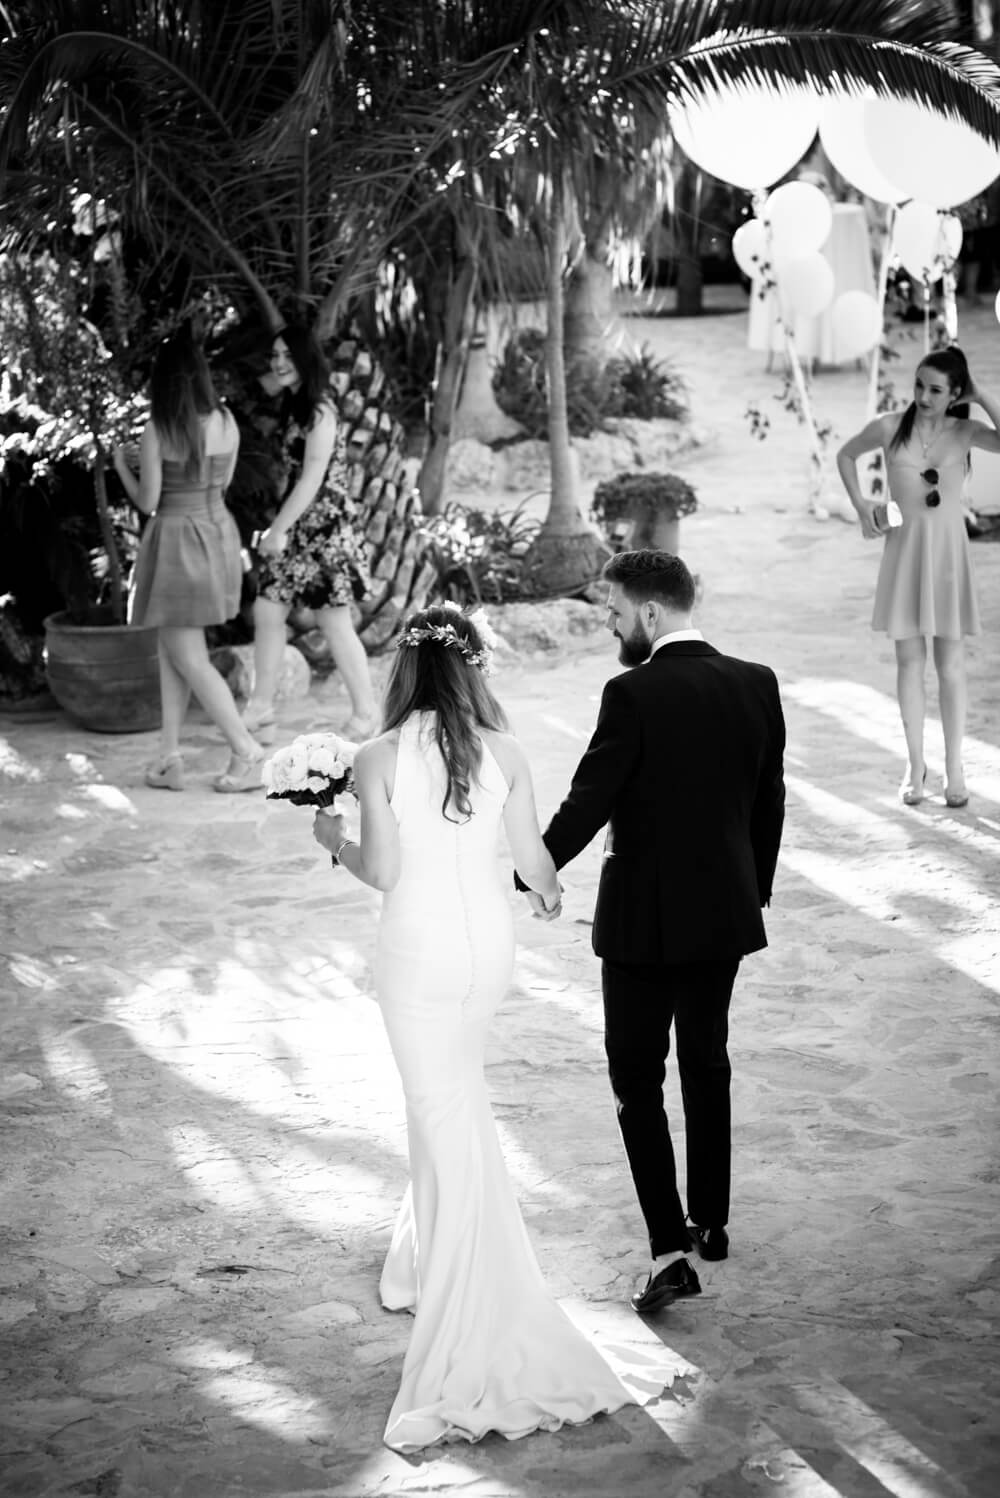 black and white photograph of a couple from behind at their wedding in Ibiza